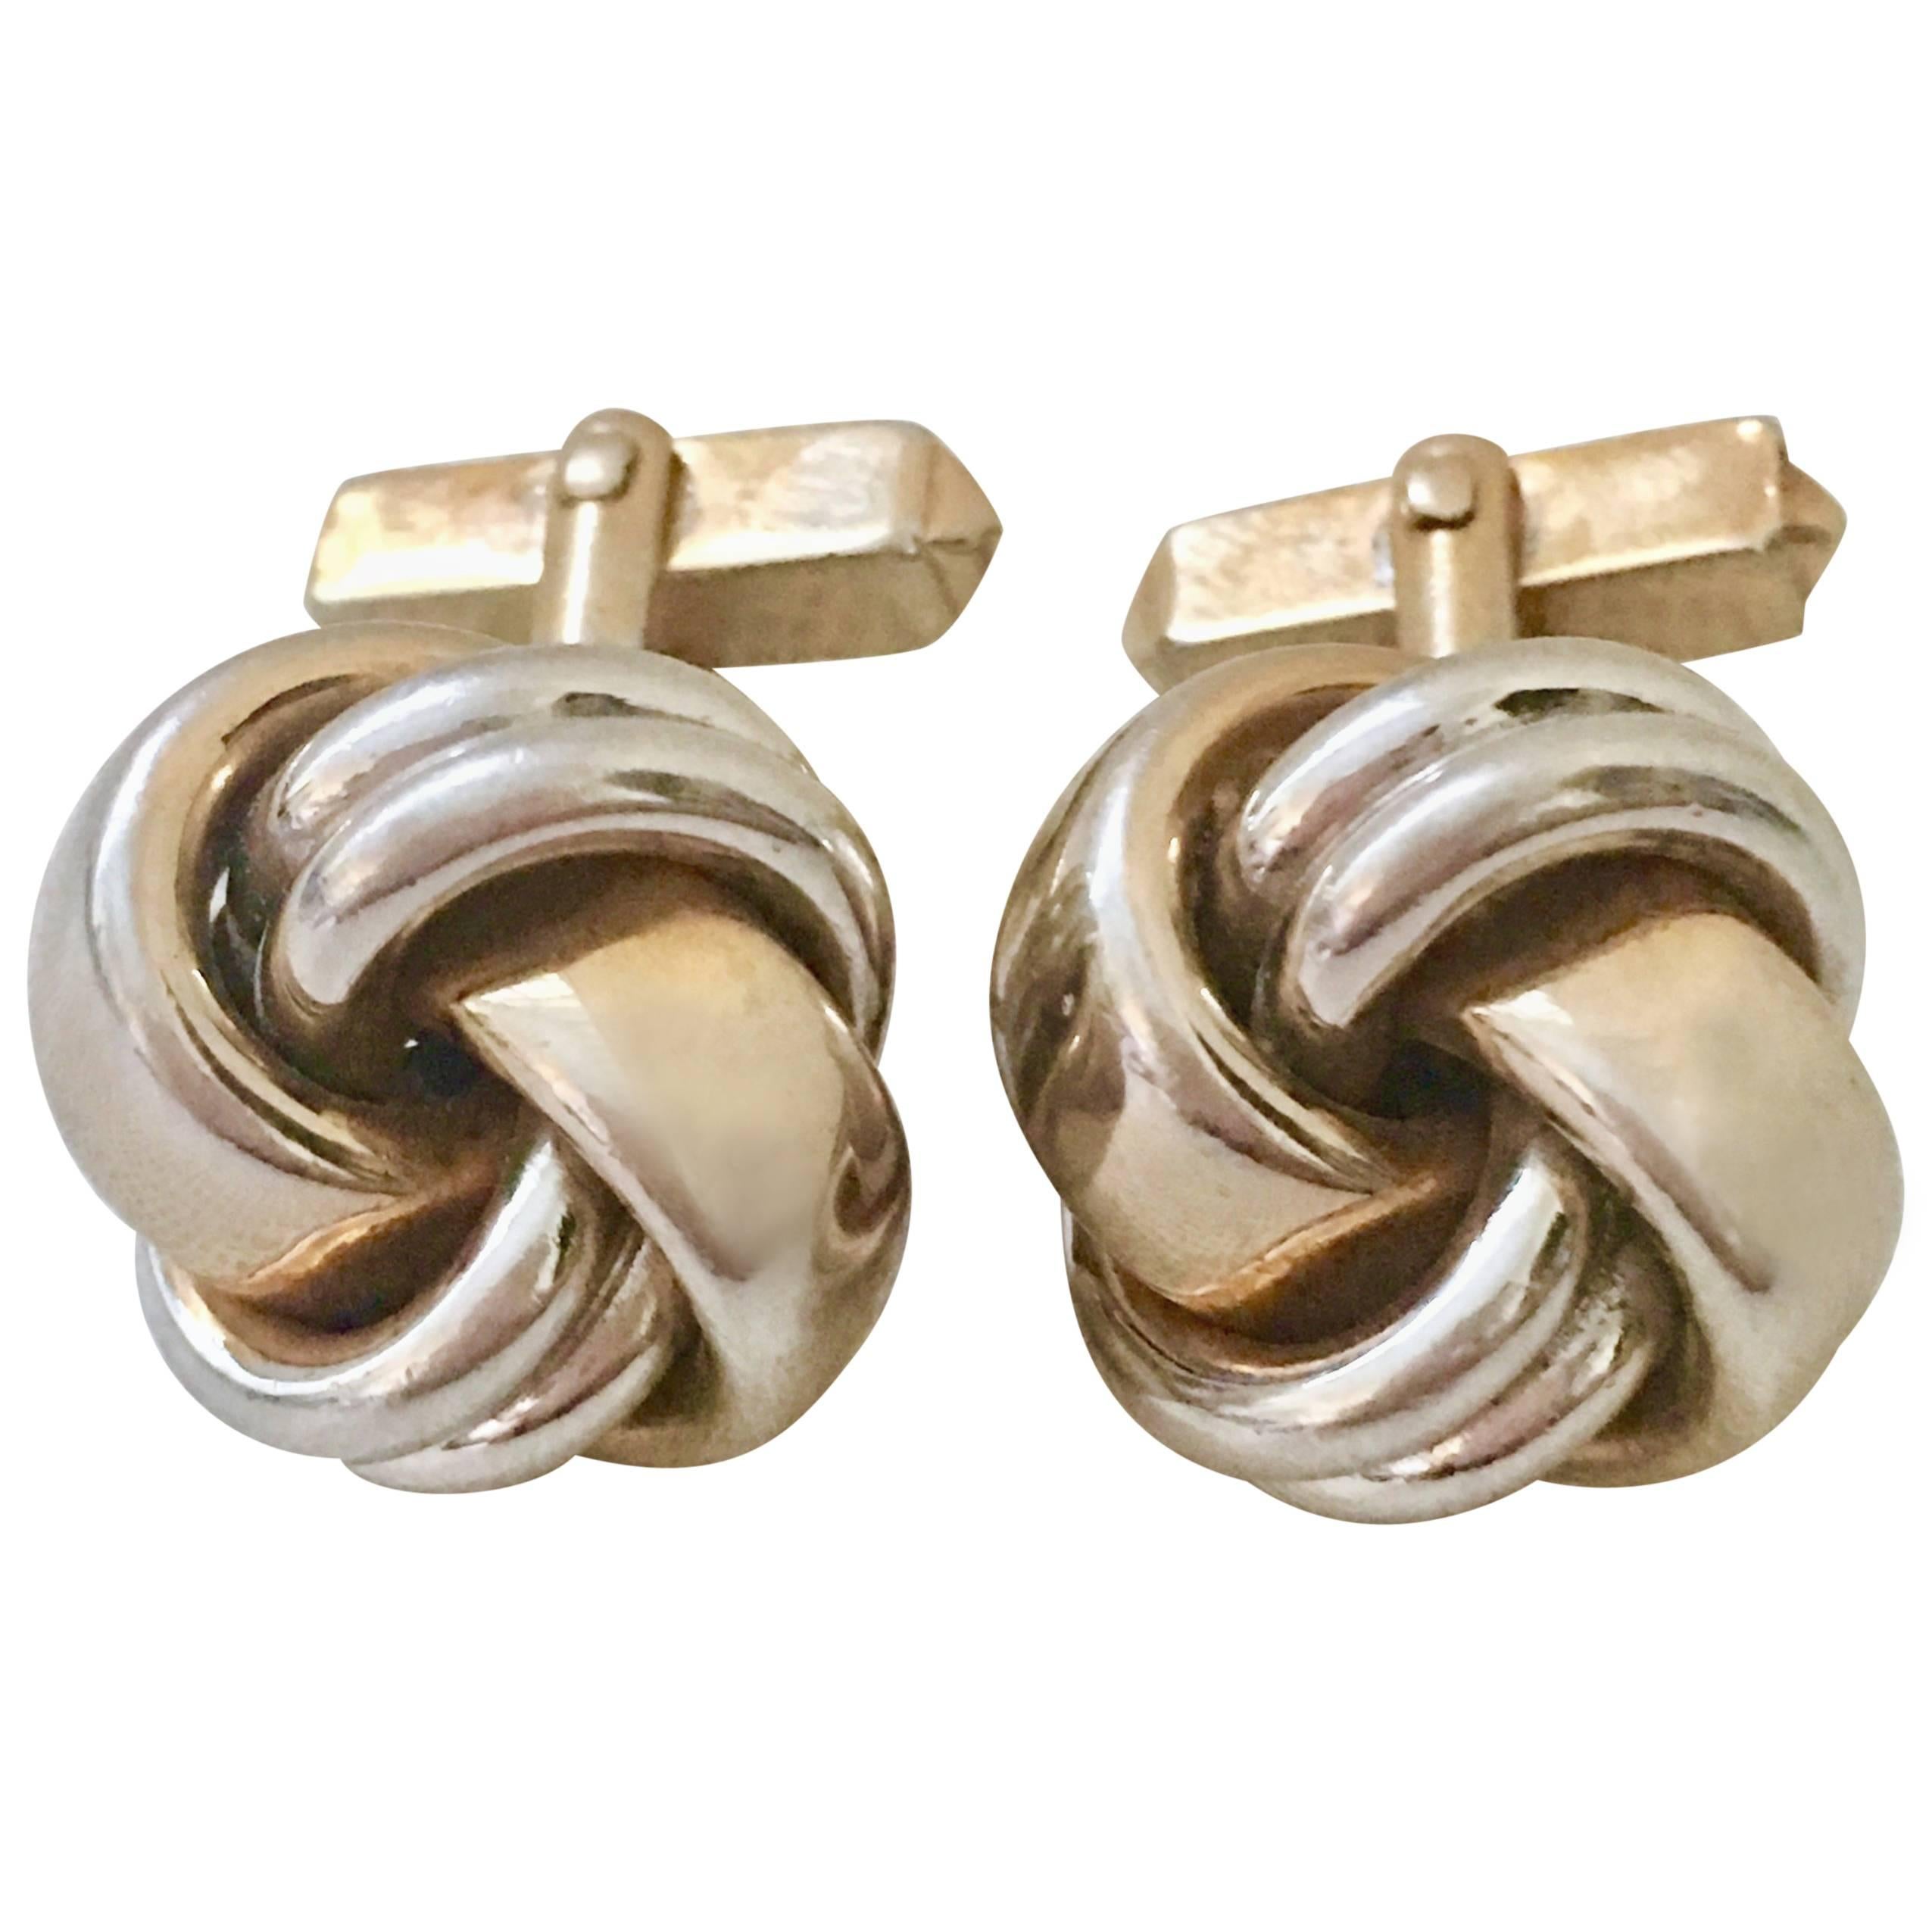 VIntage Pair Of Two Tone "Love Knot" Cufflinks By, Swank